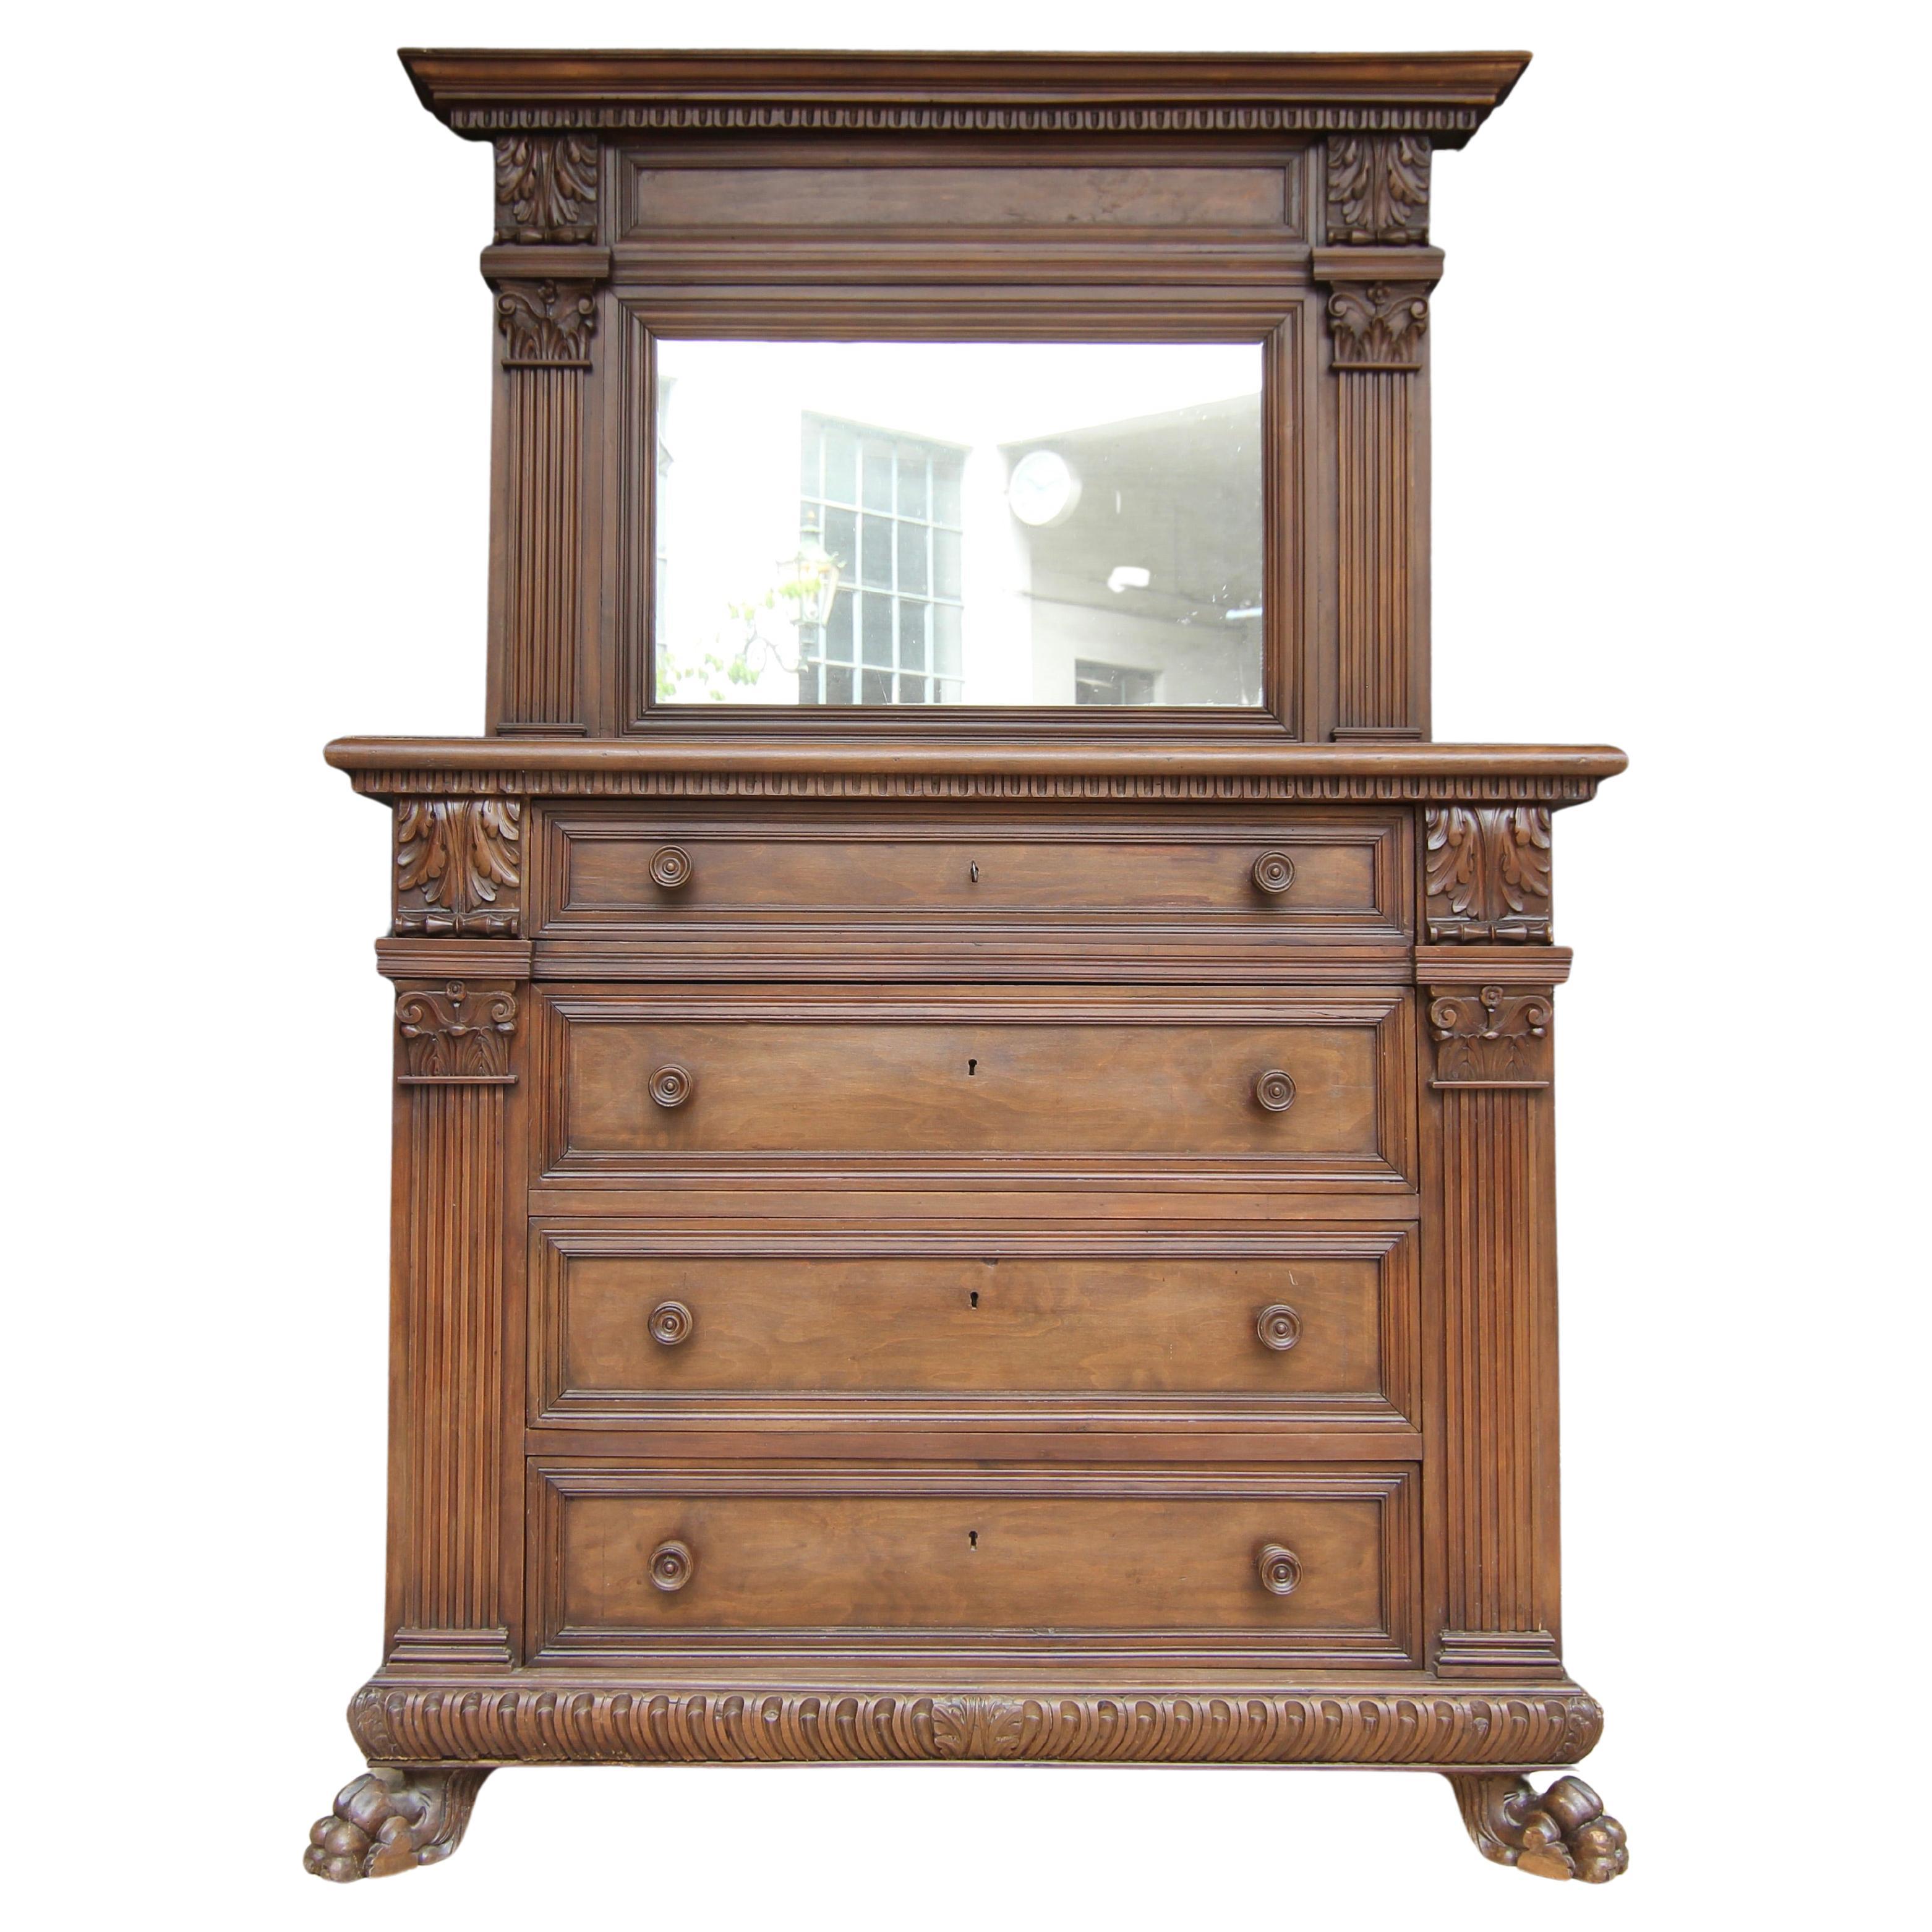 Early 20th Century Italian Renaissance Revival Chest of Drawers with Mirror Top For Sale